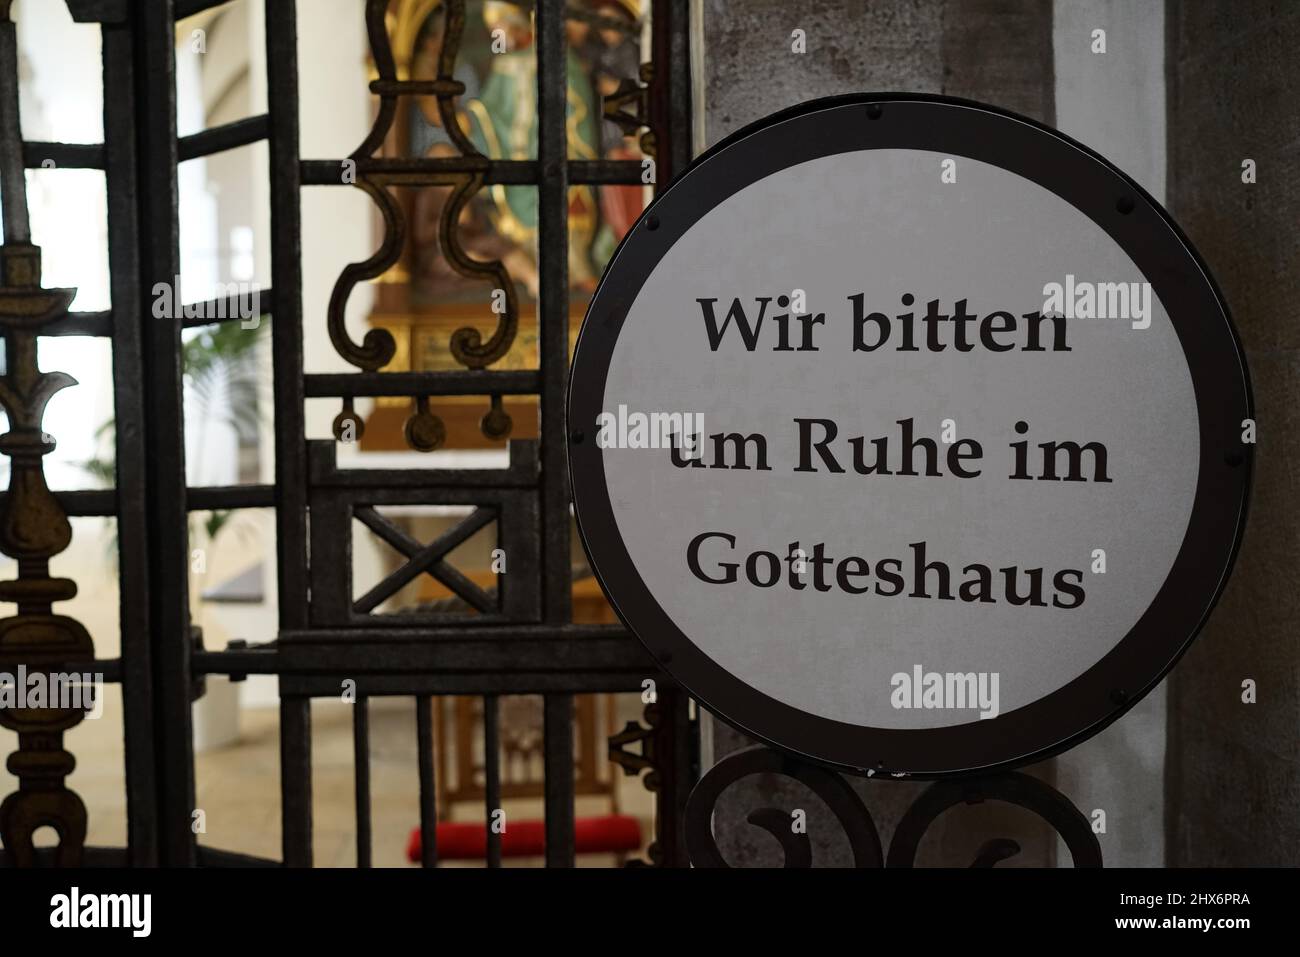 A plate with text in German. 'Wir bitten um Ruhe im Gotteshaus' means: We ask for silence in the church. In the background a blurred church interior Stock Photo